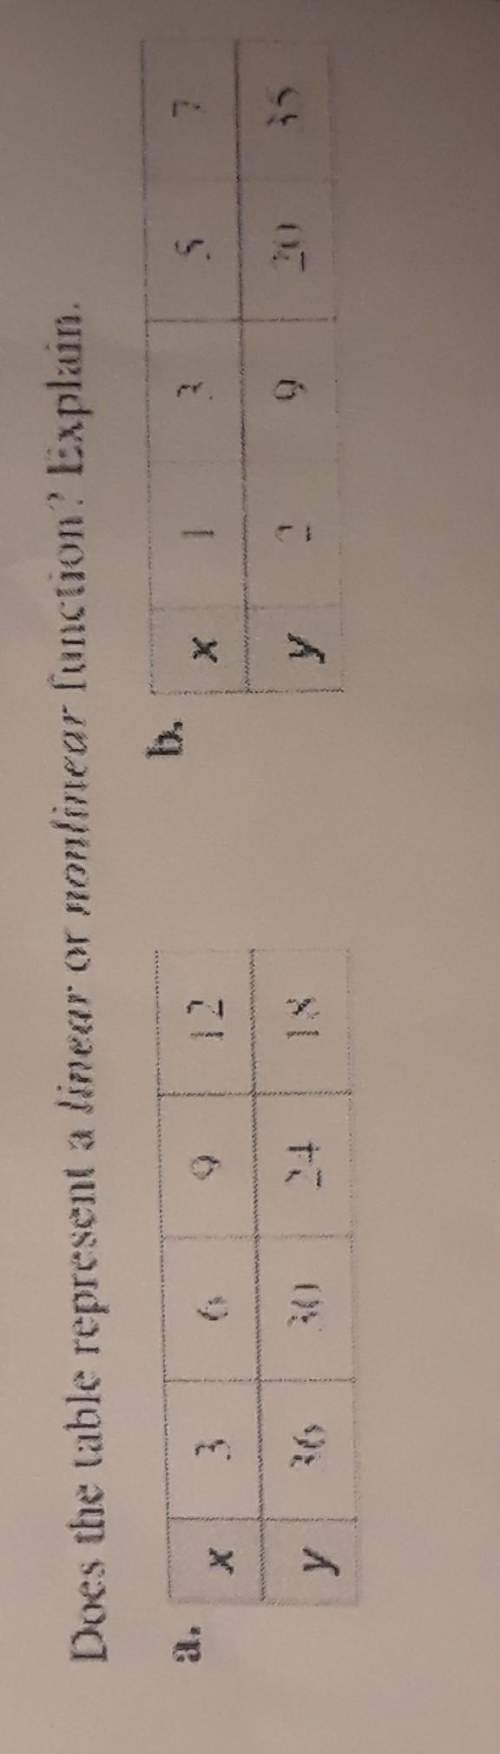 need to rewrite the table if you know how write the equation for the table